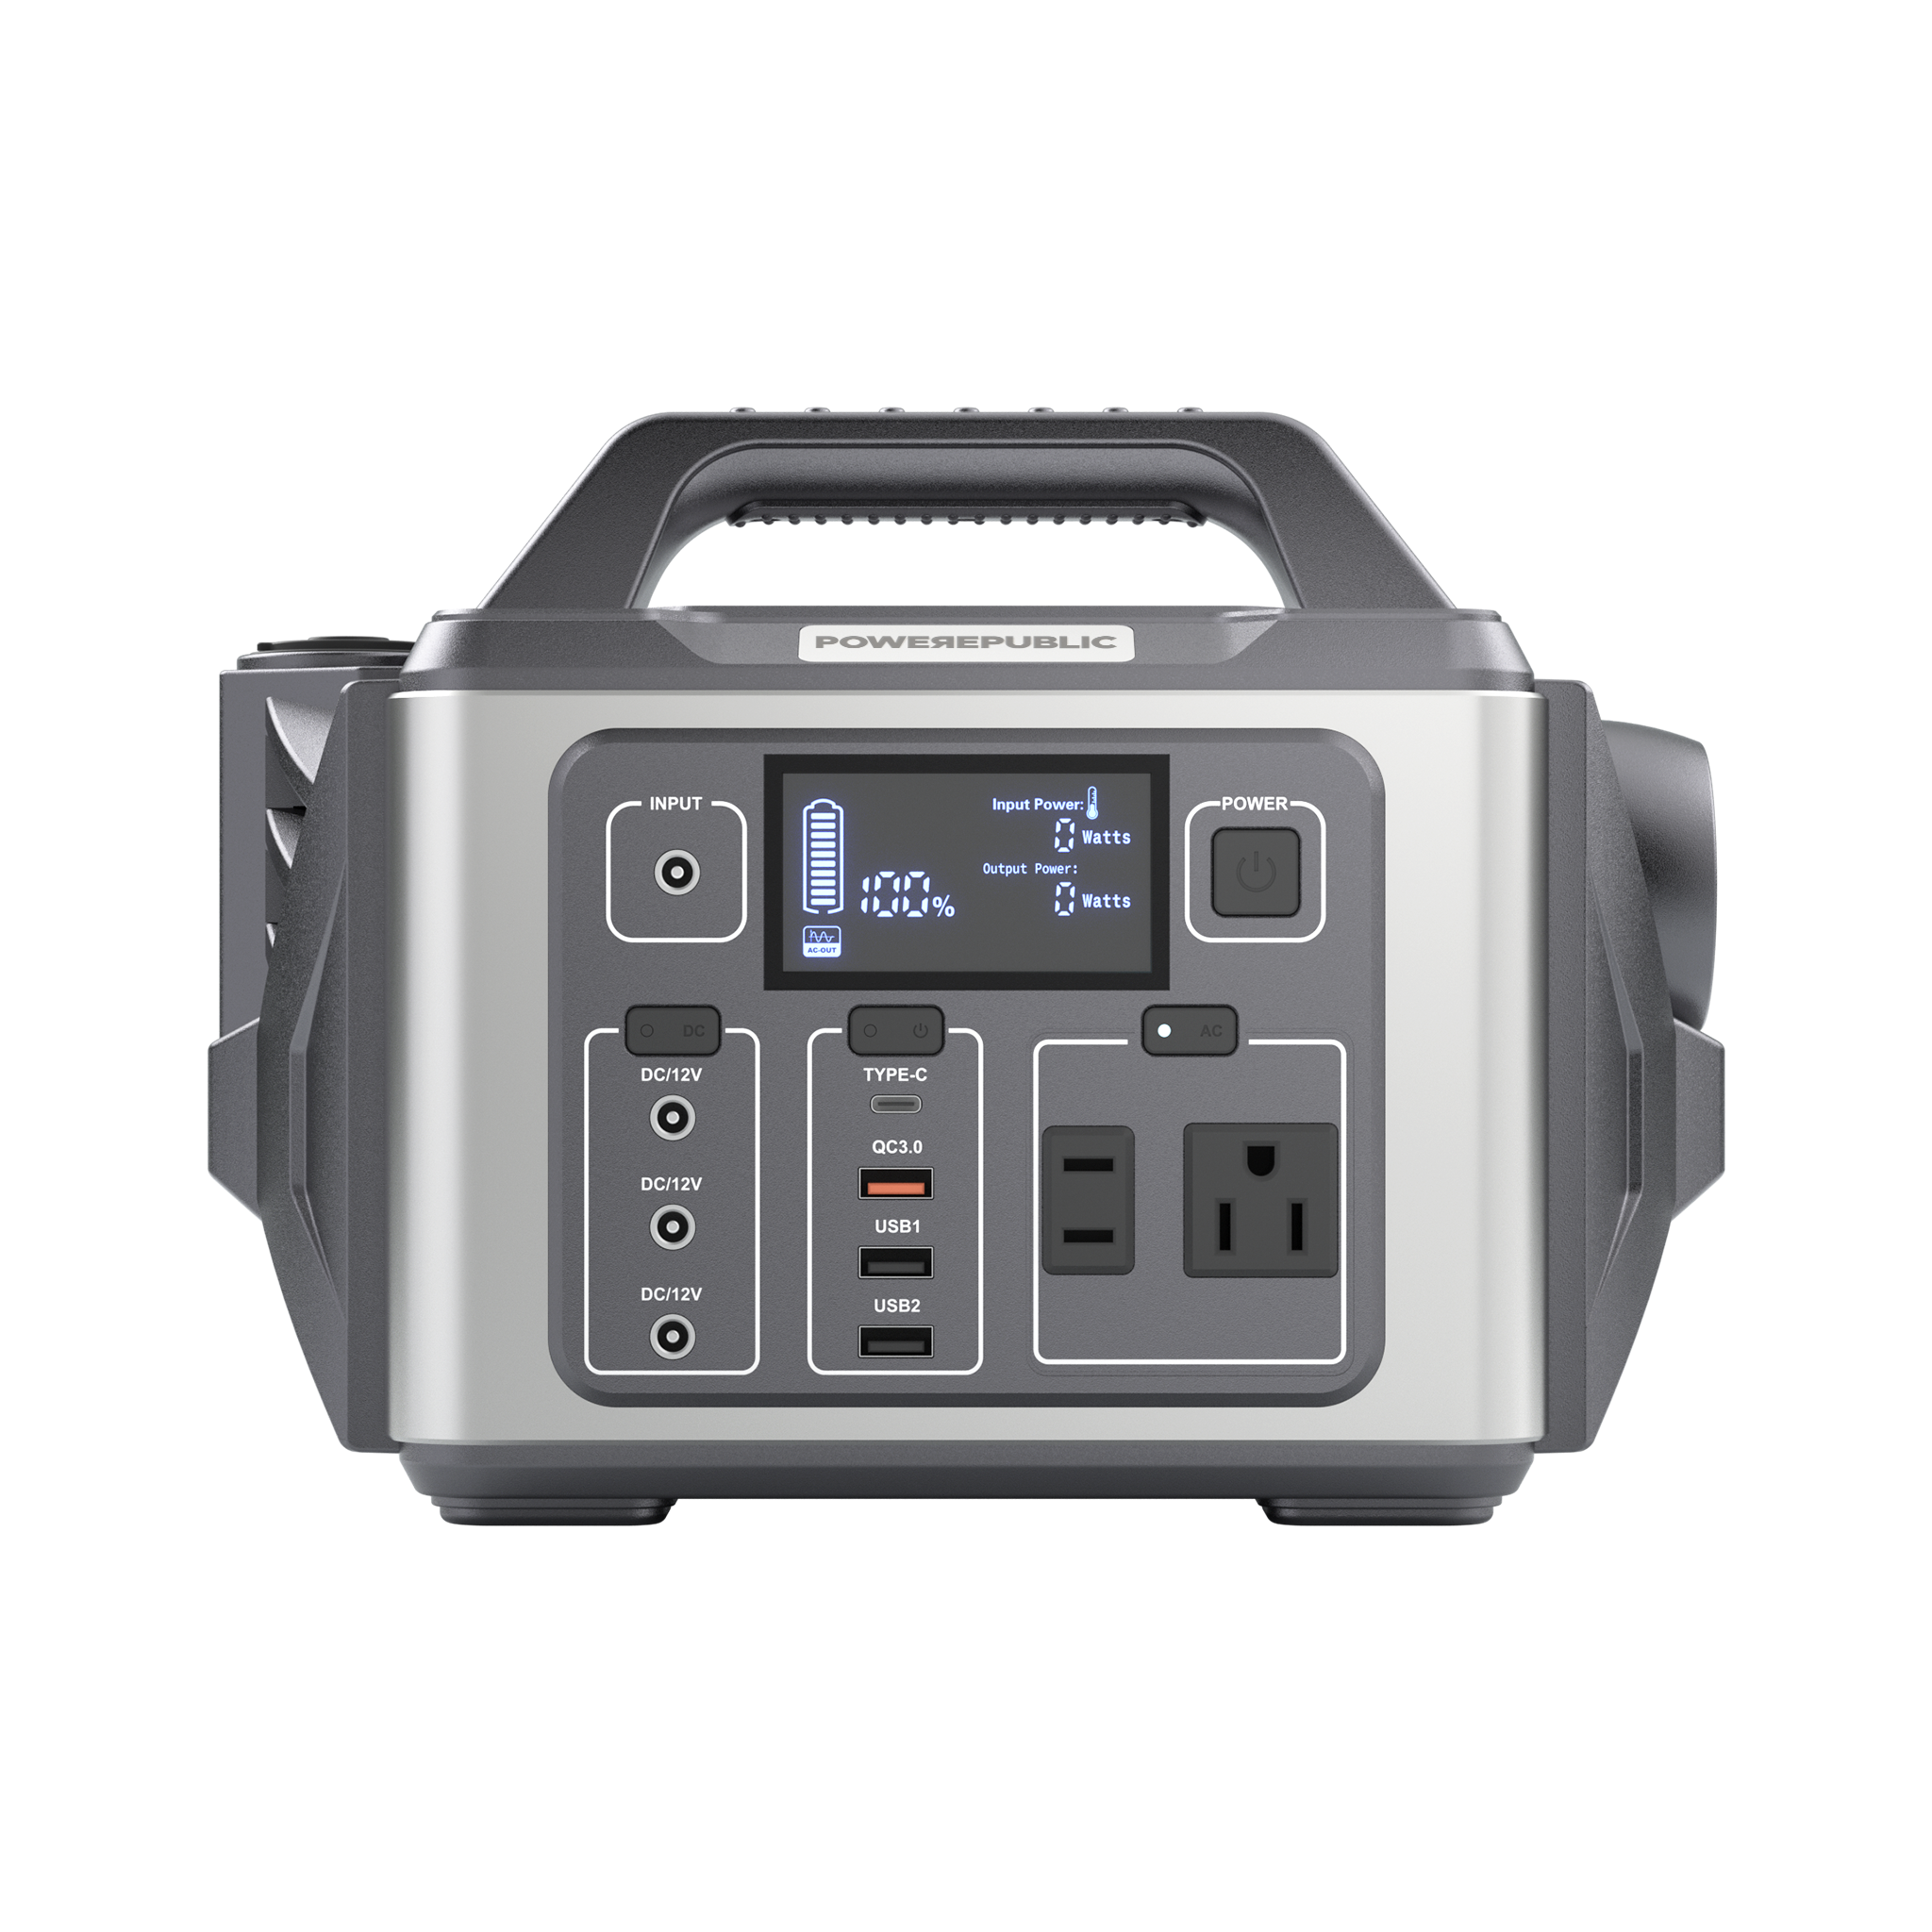 POWEREPUBLIC T306 portable power station, 300W 296Wh, metallic gray body with turbine-engine and aircraft wing design, a handle, an LCD screen, and input and output ports.